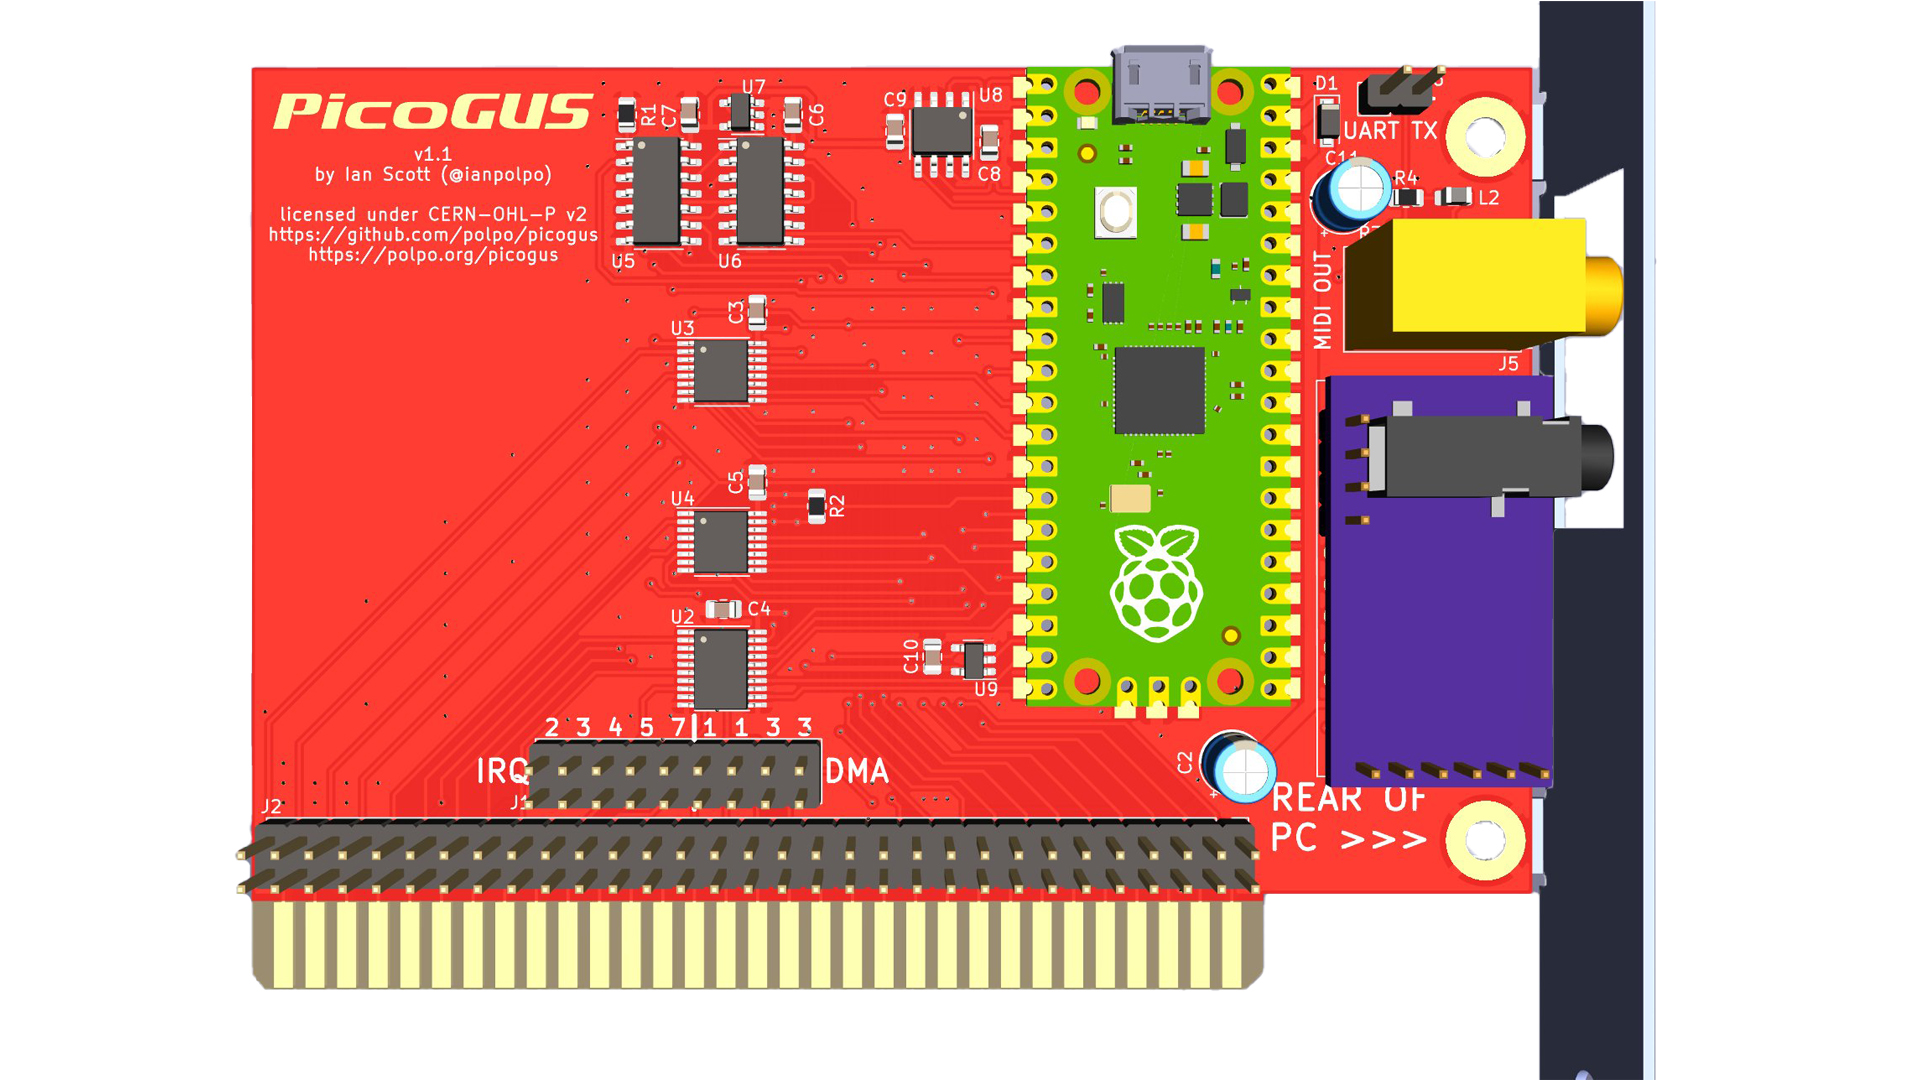 PicoGUS brings UltraSound to retro computers